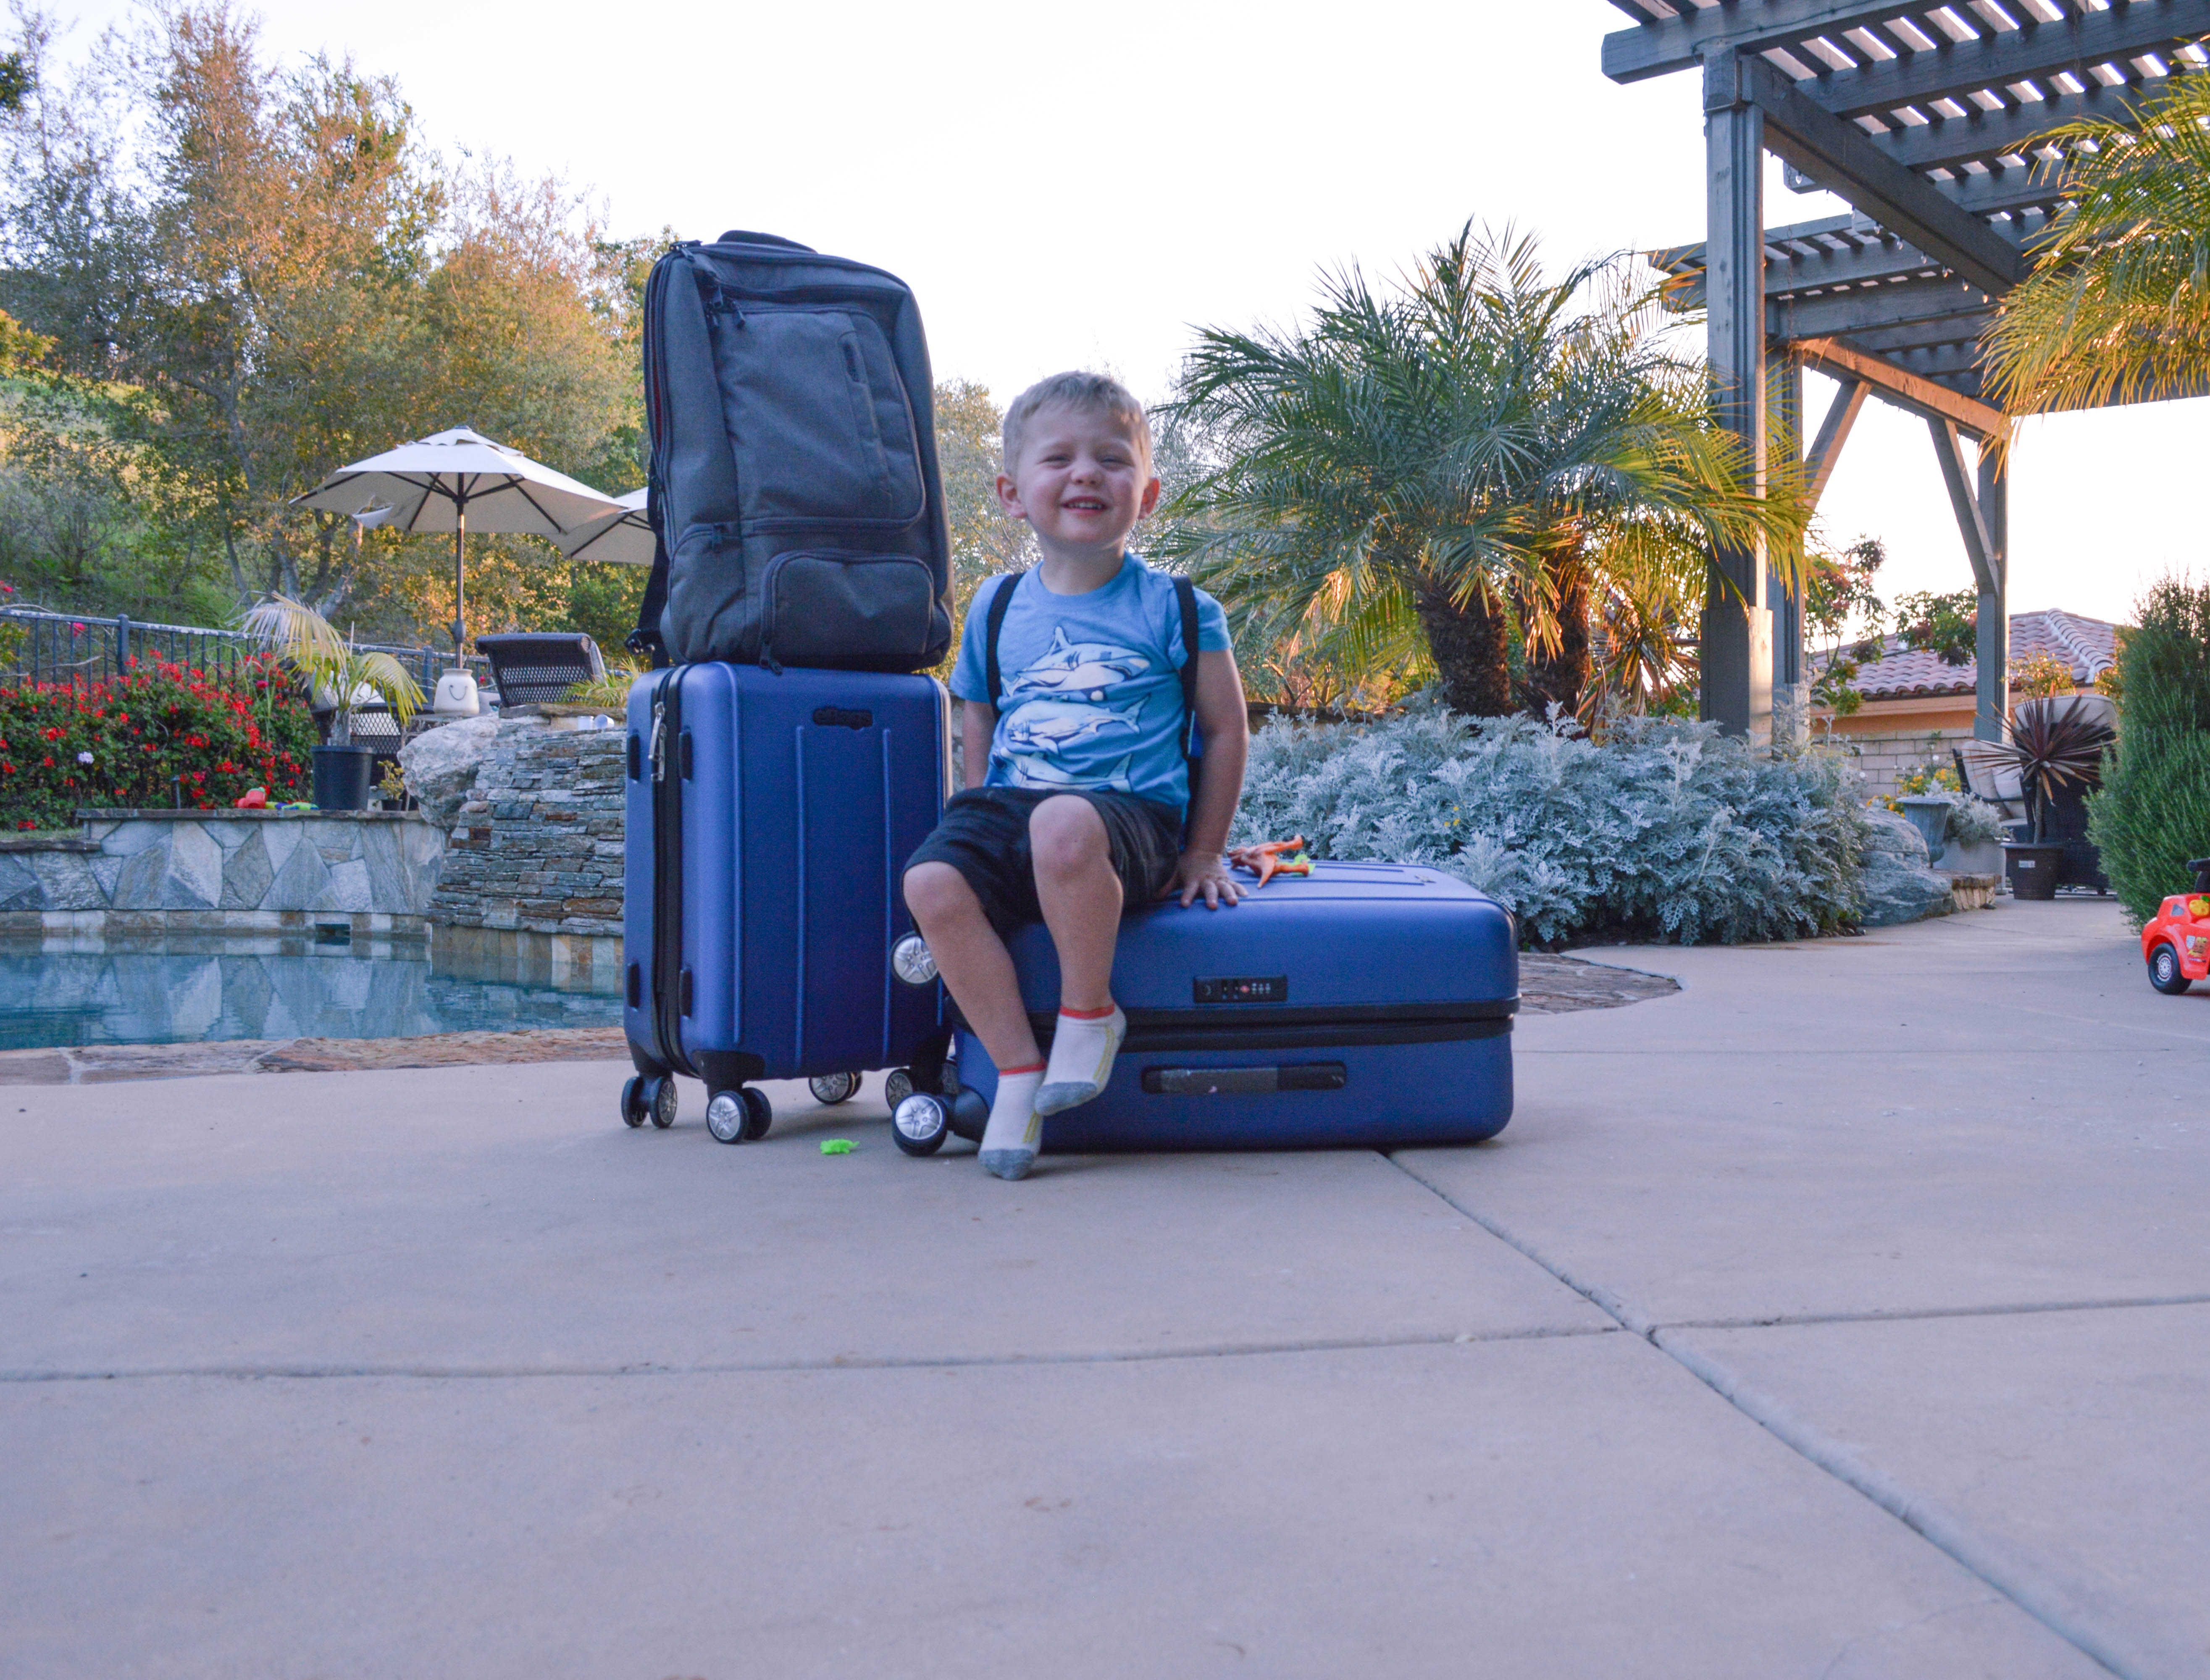 Ebags Review: Packing for the Whole Family featured by popular Denver lifestyle blogger, All Things Lovely